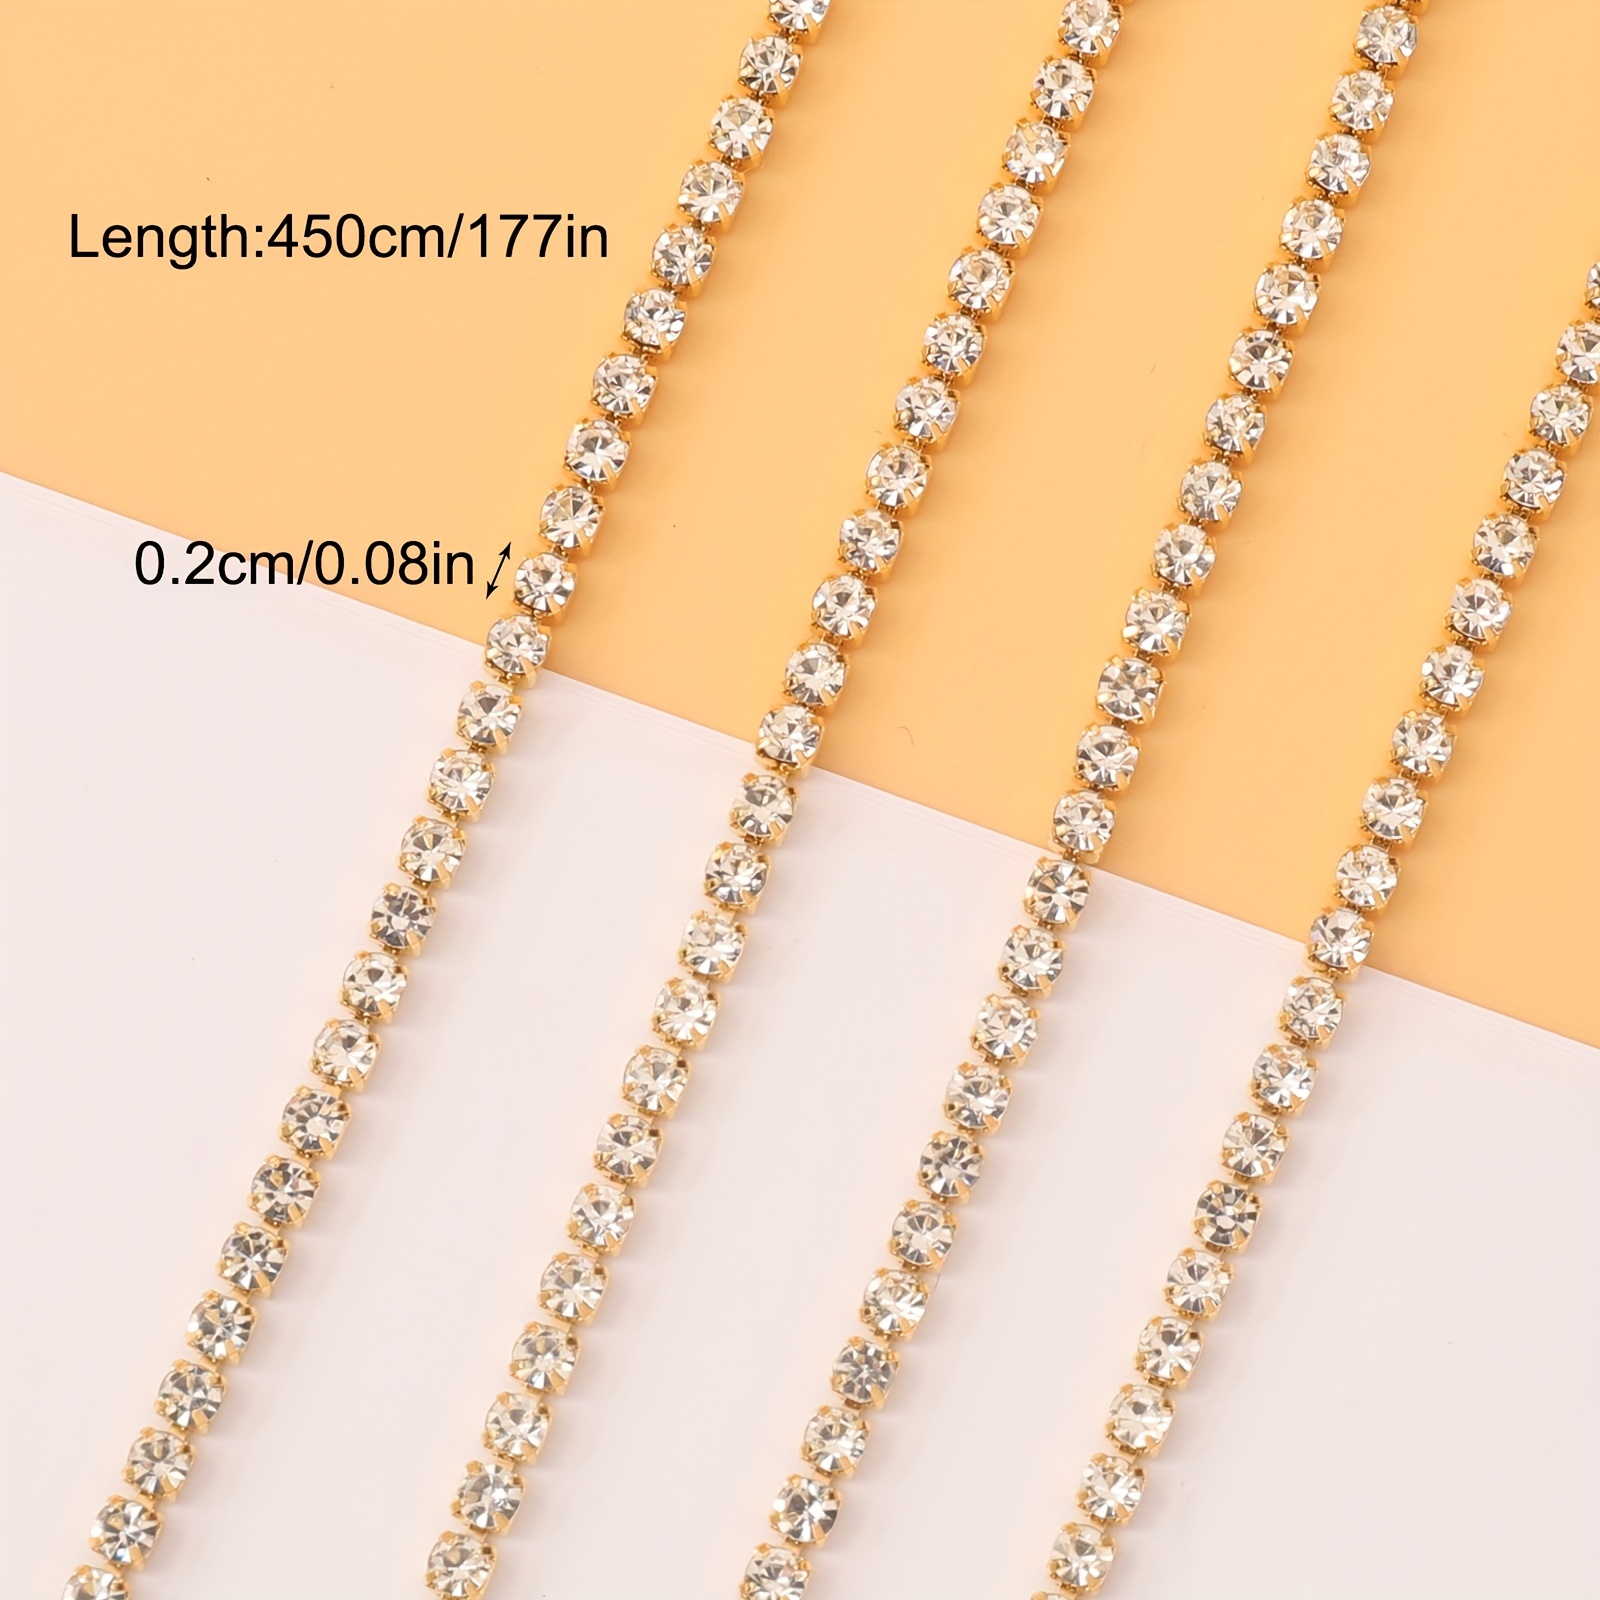 1 Roll 450cm Sparkly Rhinestone Chain For Diy Jewelry Making, Nail Art,  Clothing And Shoe Decoration